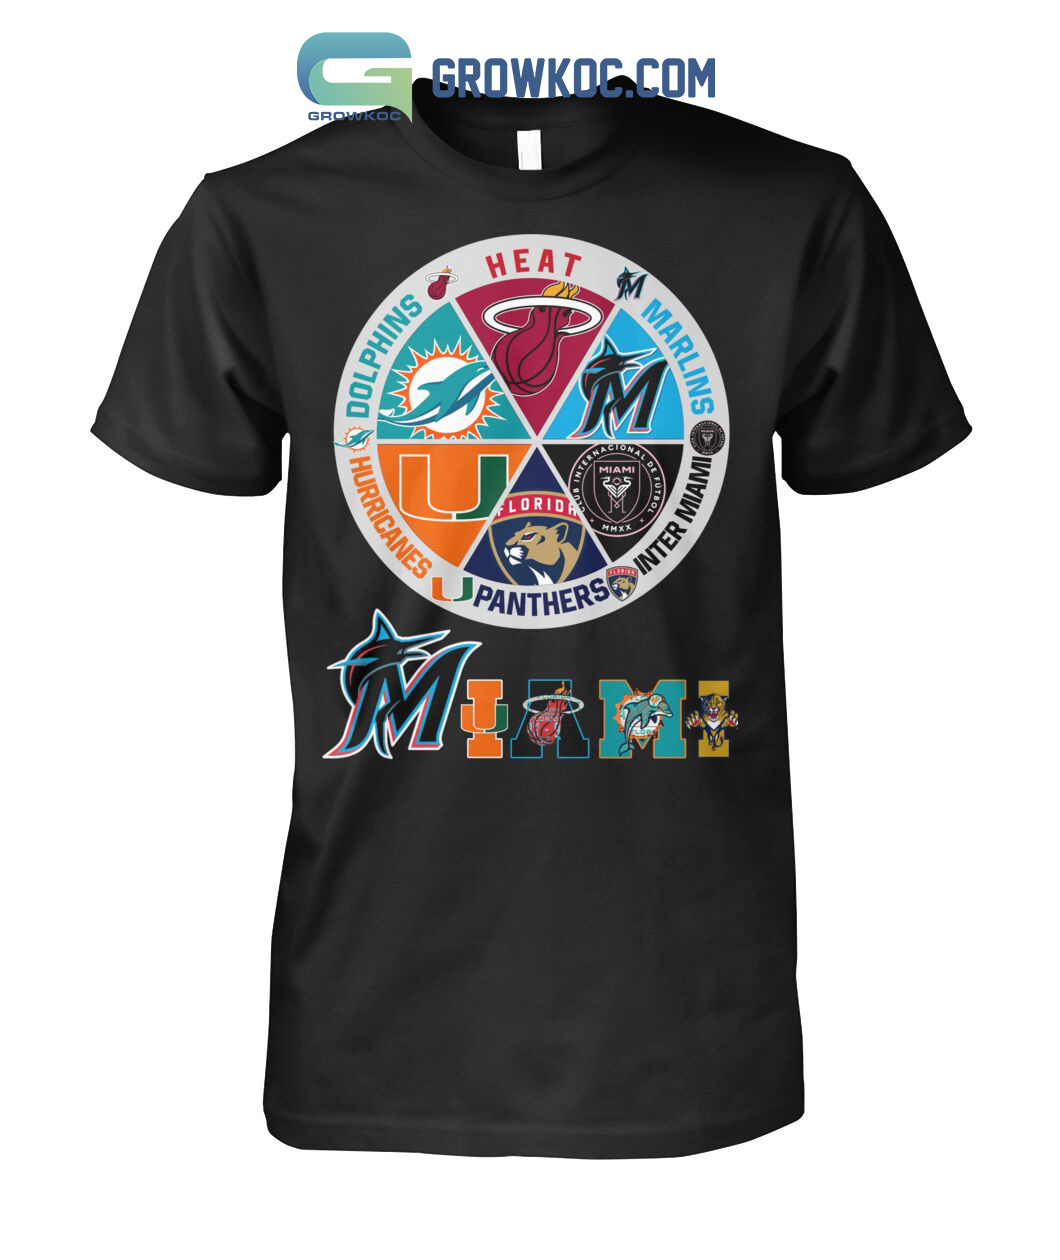 Miami Heat Dolphins Hurricanes Panthers Inter Miami Marlins T-Shirt